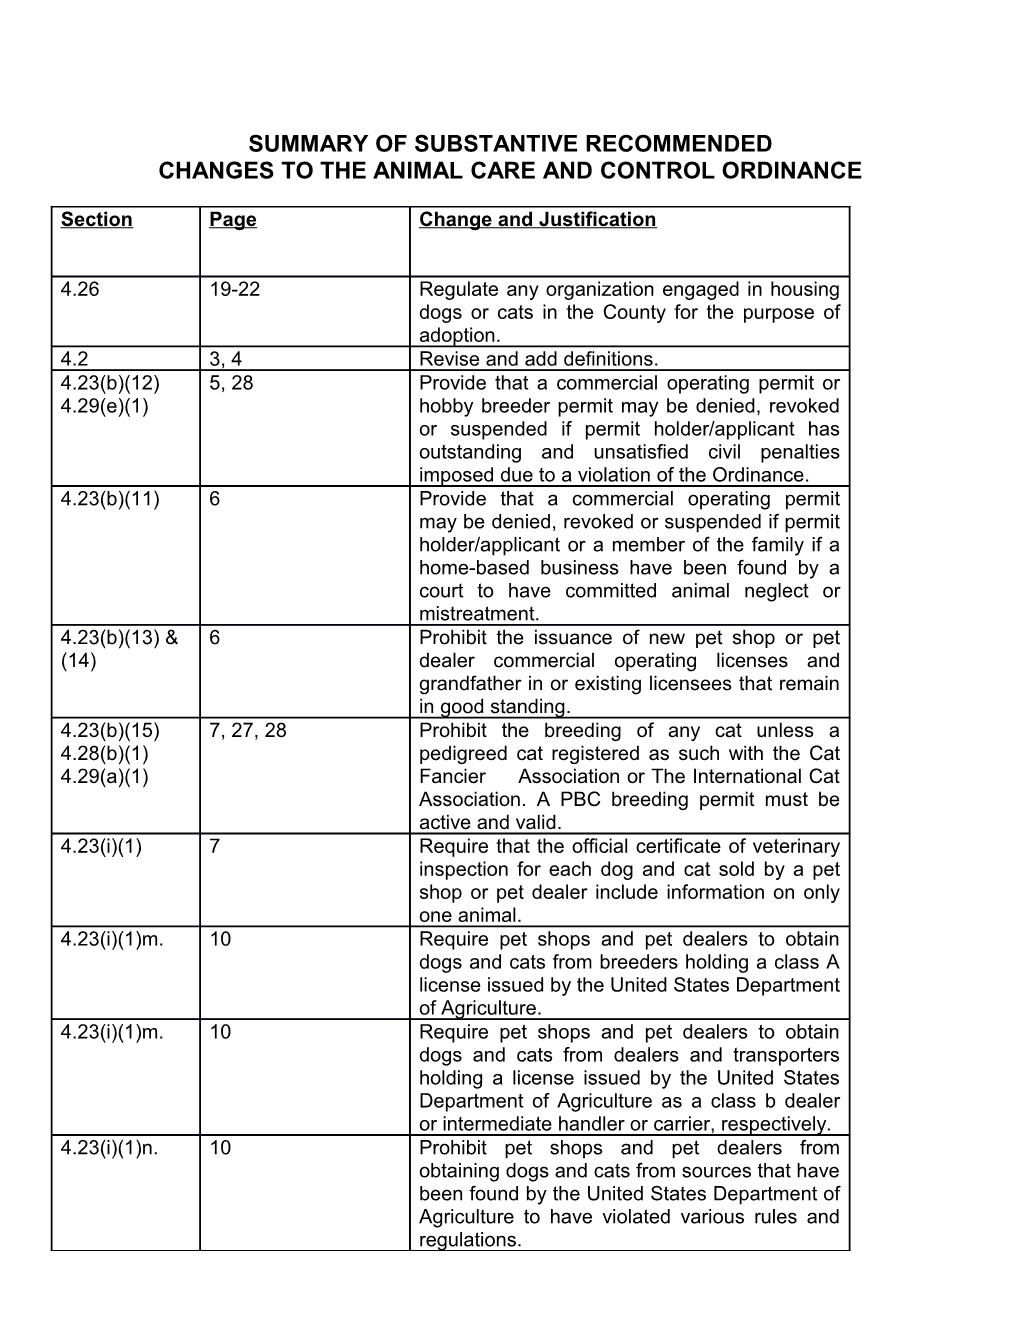 Changes to the Animal Care and Control Ordinance